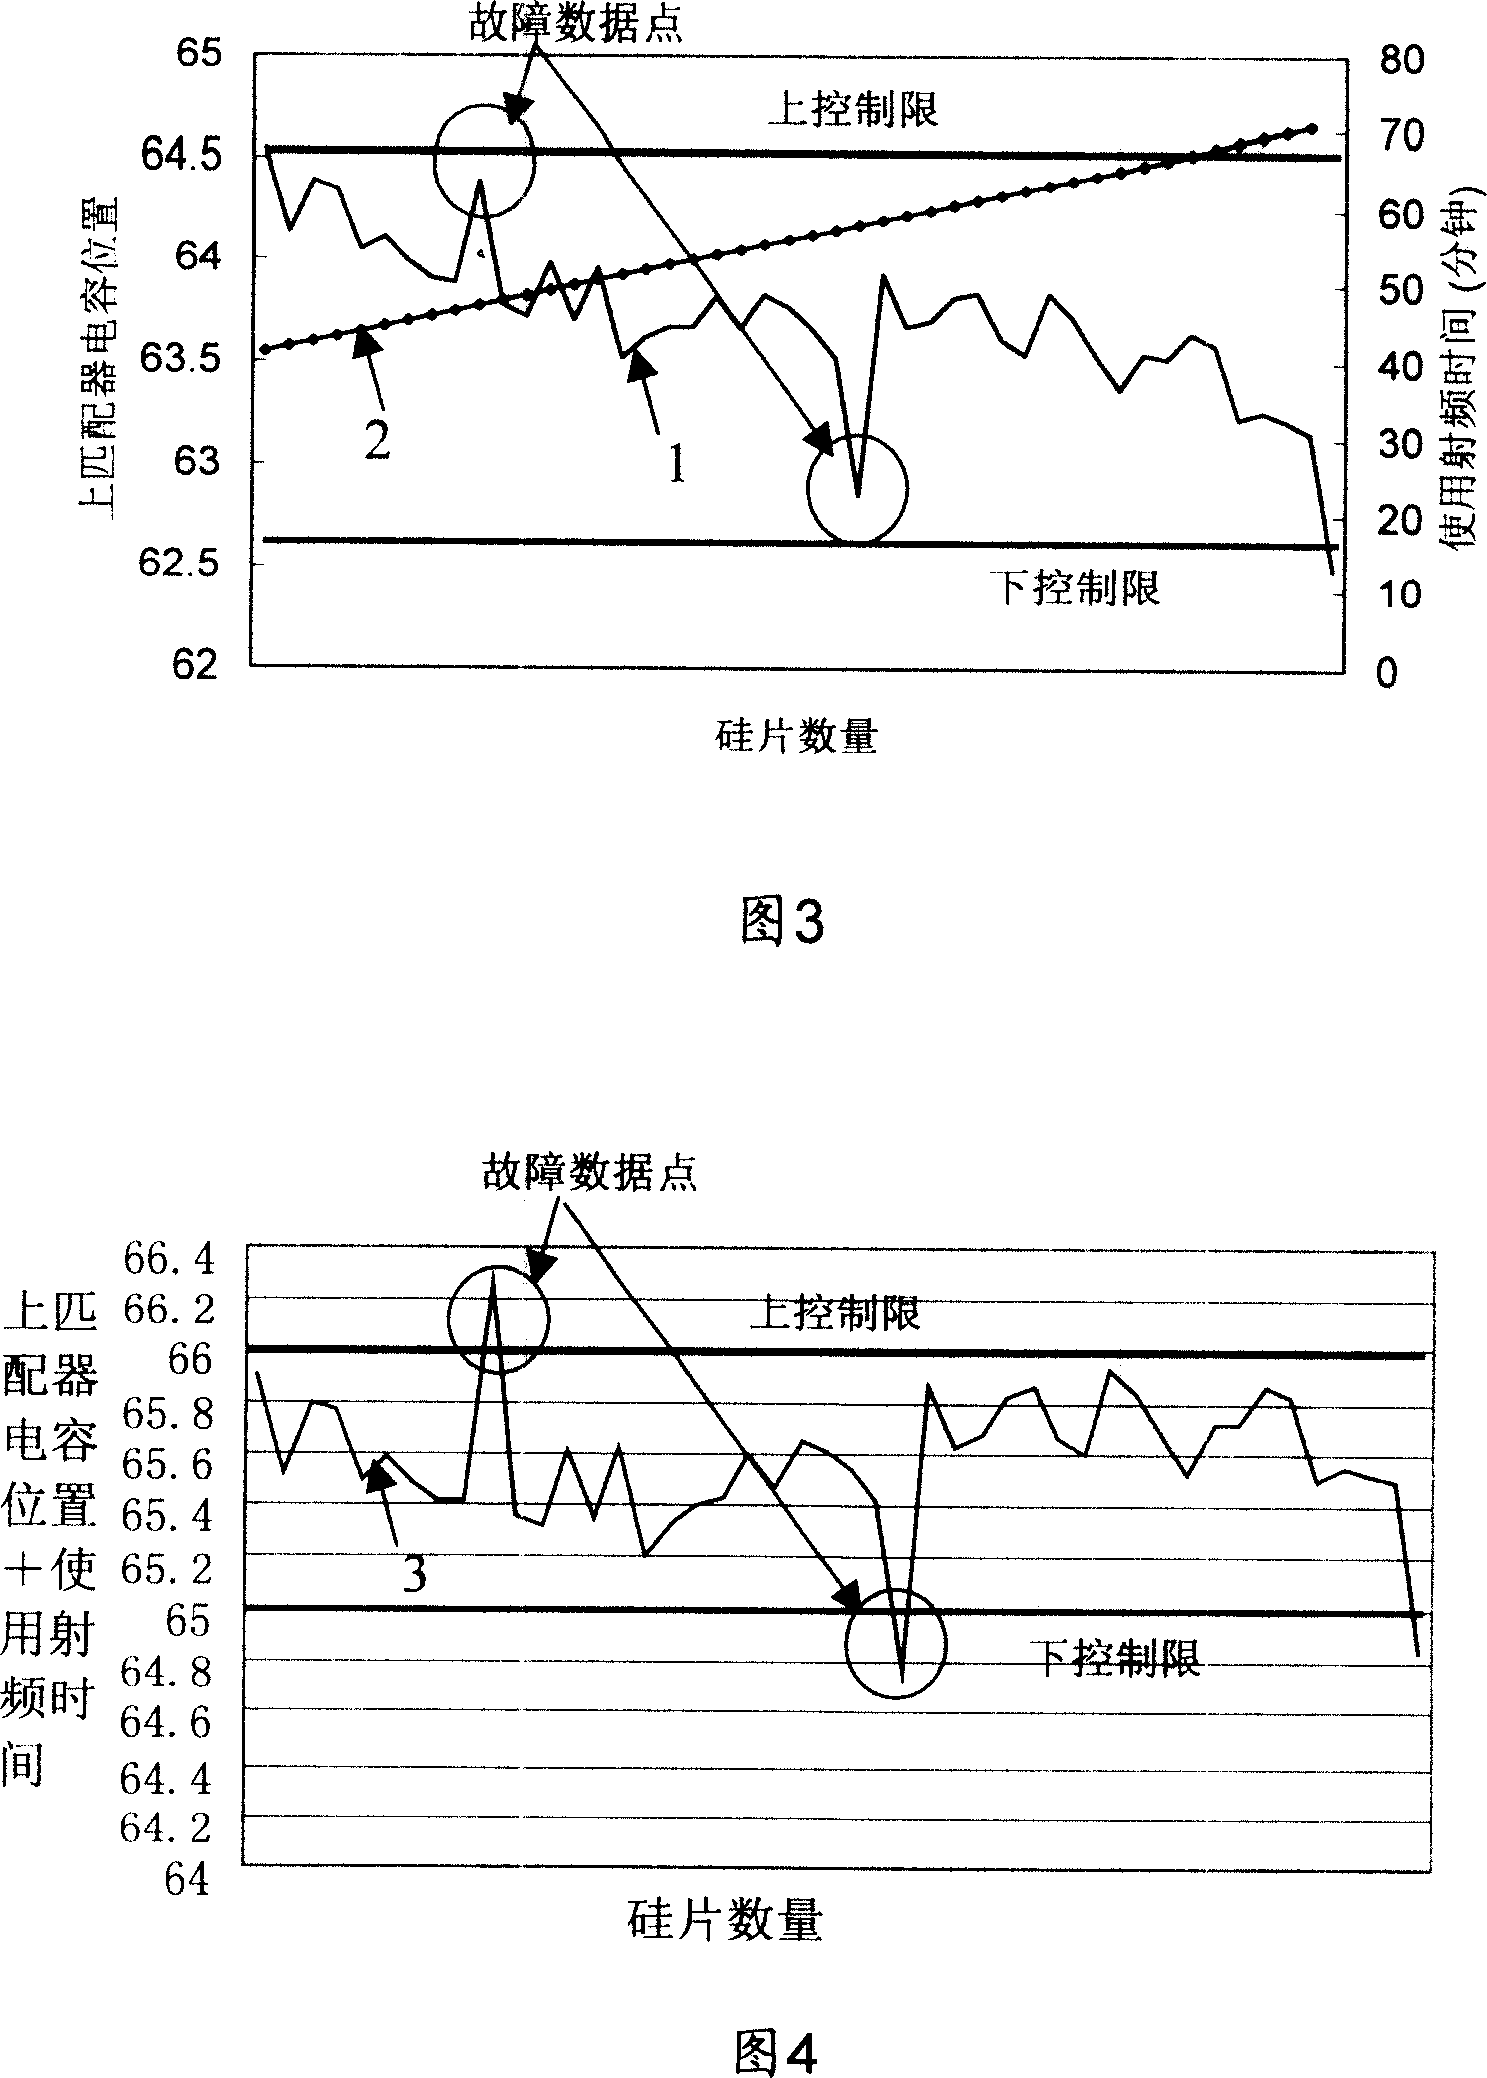 Method for on-line fault diagnosis of etching equipment